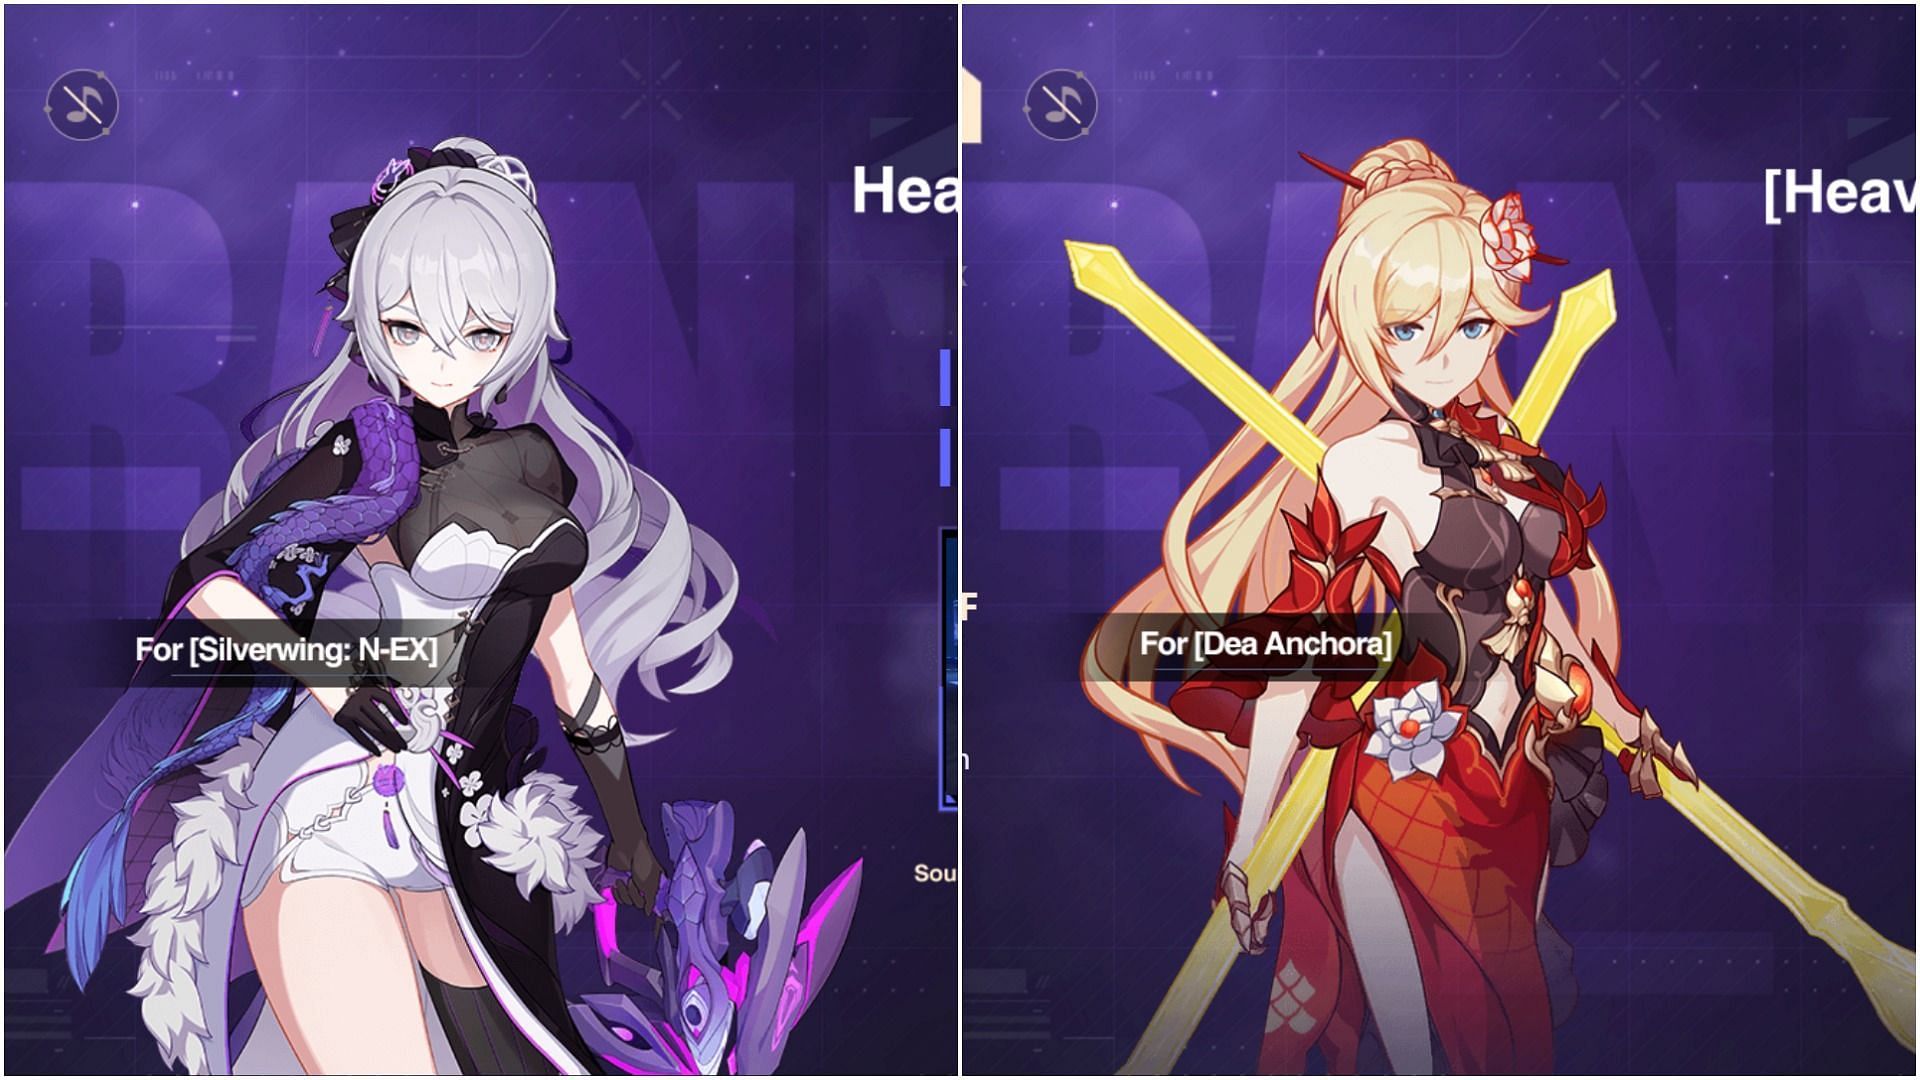 New outfits for Silverwing and Dea Anchora (Image via Honkai Impact 3rd)